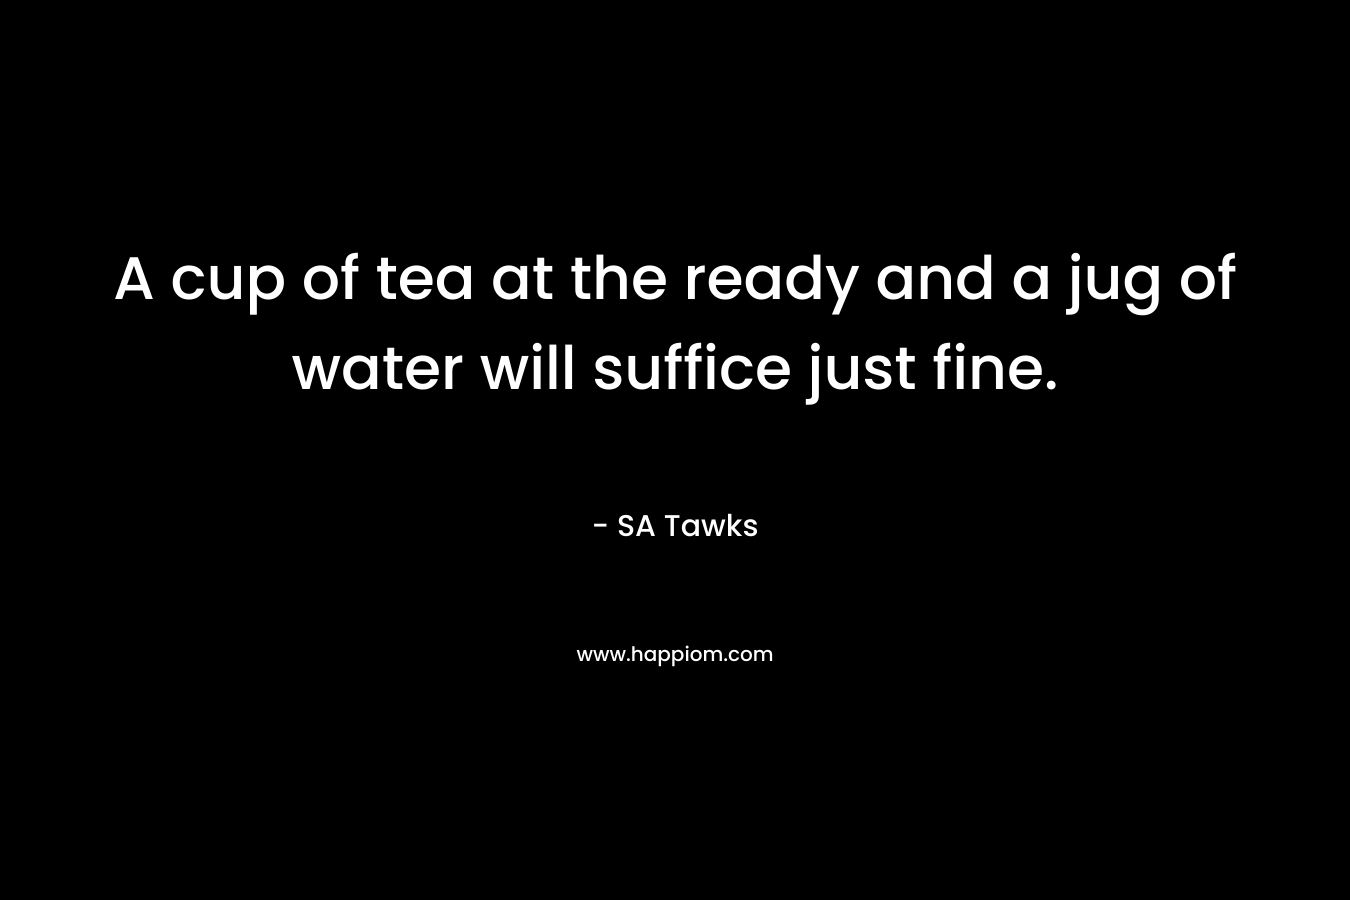 A cup of tea at the ready and a jug of water will suffice just fine.